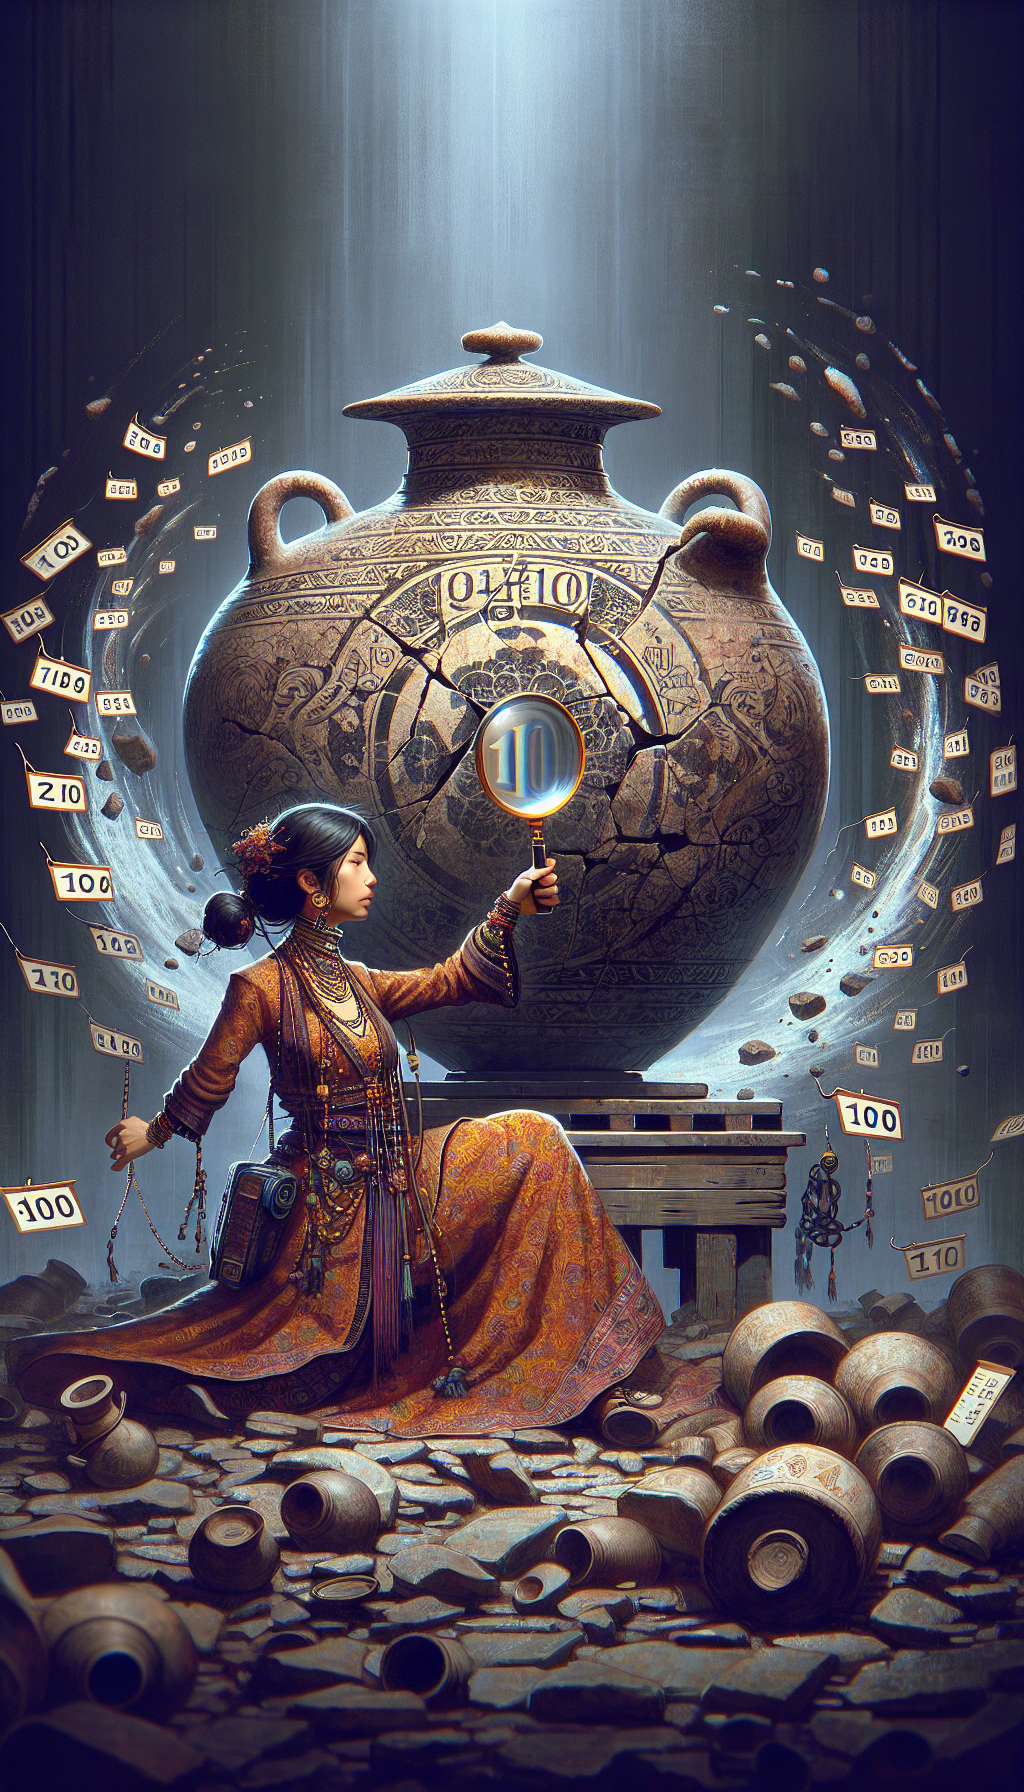 An illustration depicting a whimsical detective, magnifying glass in hand, inspecting a large, cracked 10-gallon crock, with ornate patterns symbolizing its age and a bold '10' ghosted in the background. The crock stands atop an auction block with varying price tags swirling around, suggesting its fluctuating value as the detective deciphers its historical enigma.